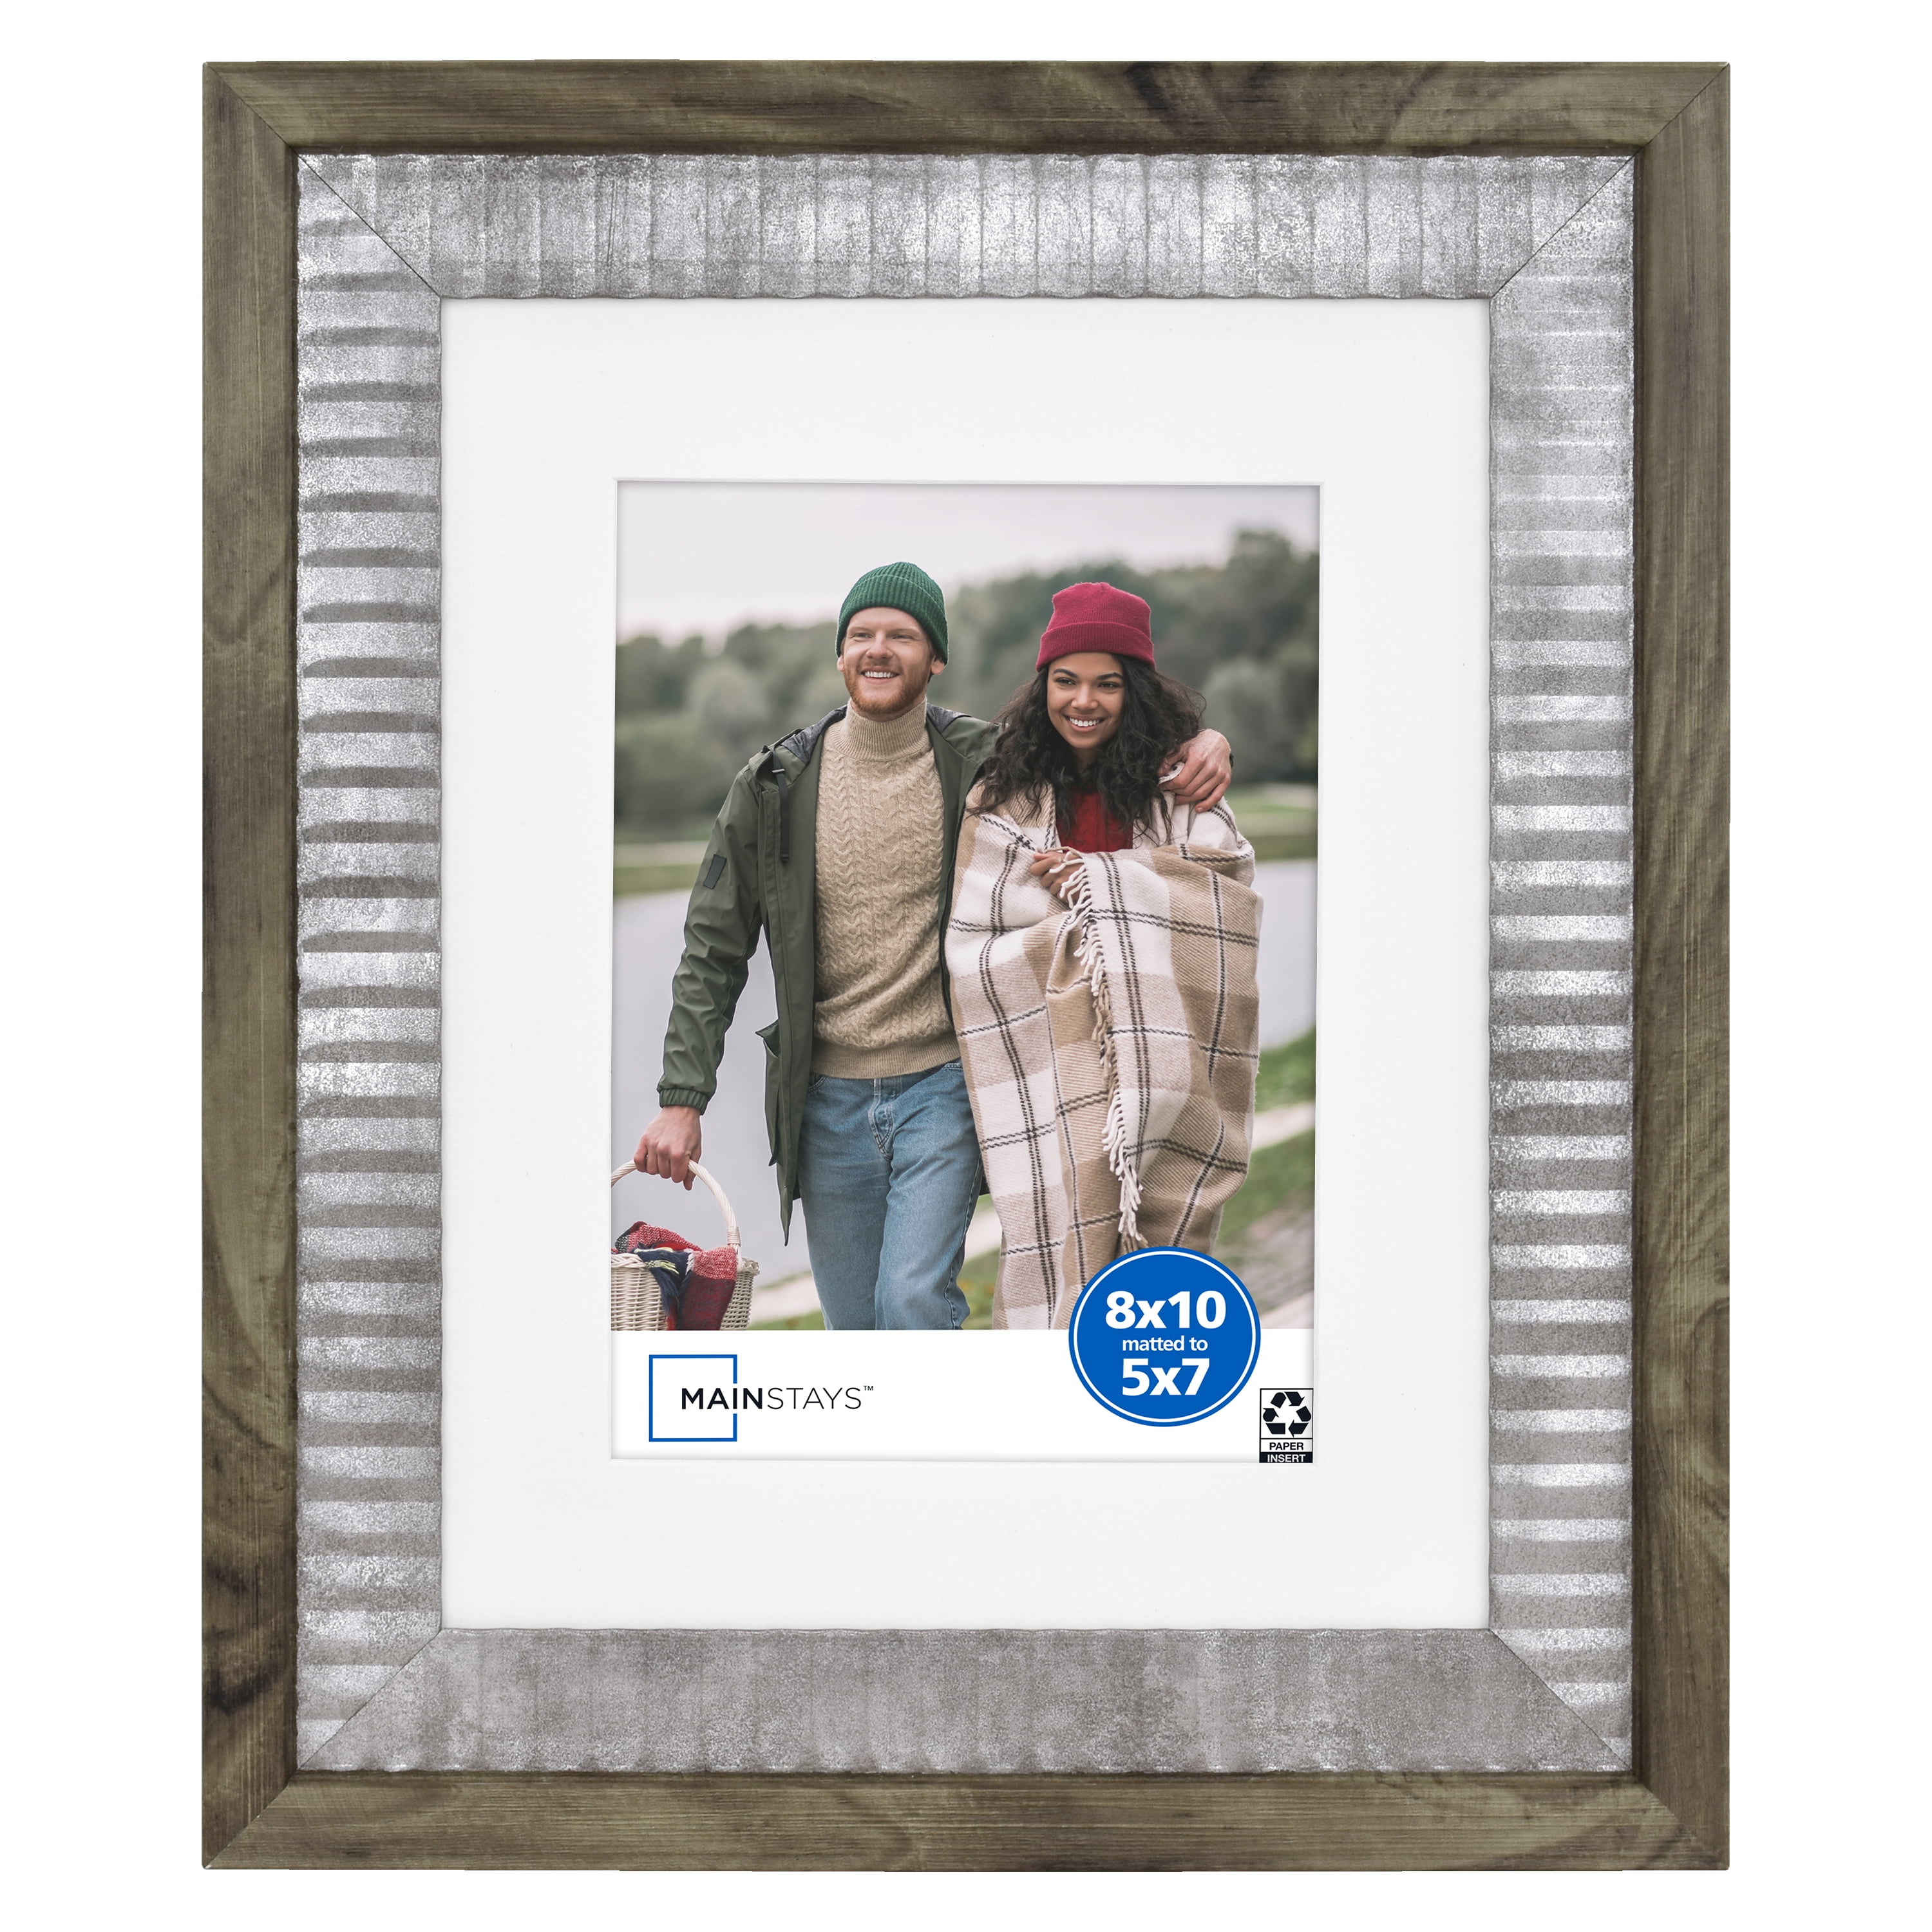 16 Pieces Photo Frame 8x10 Matted To 5x7(12.7x17.78cm) - Frame